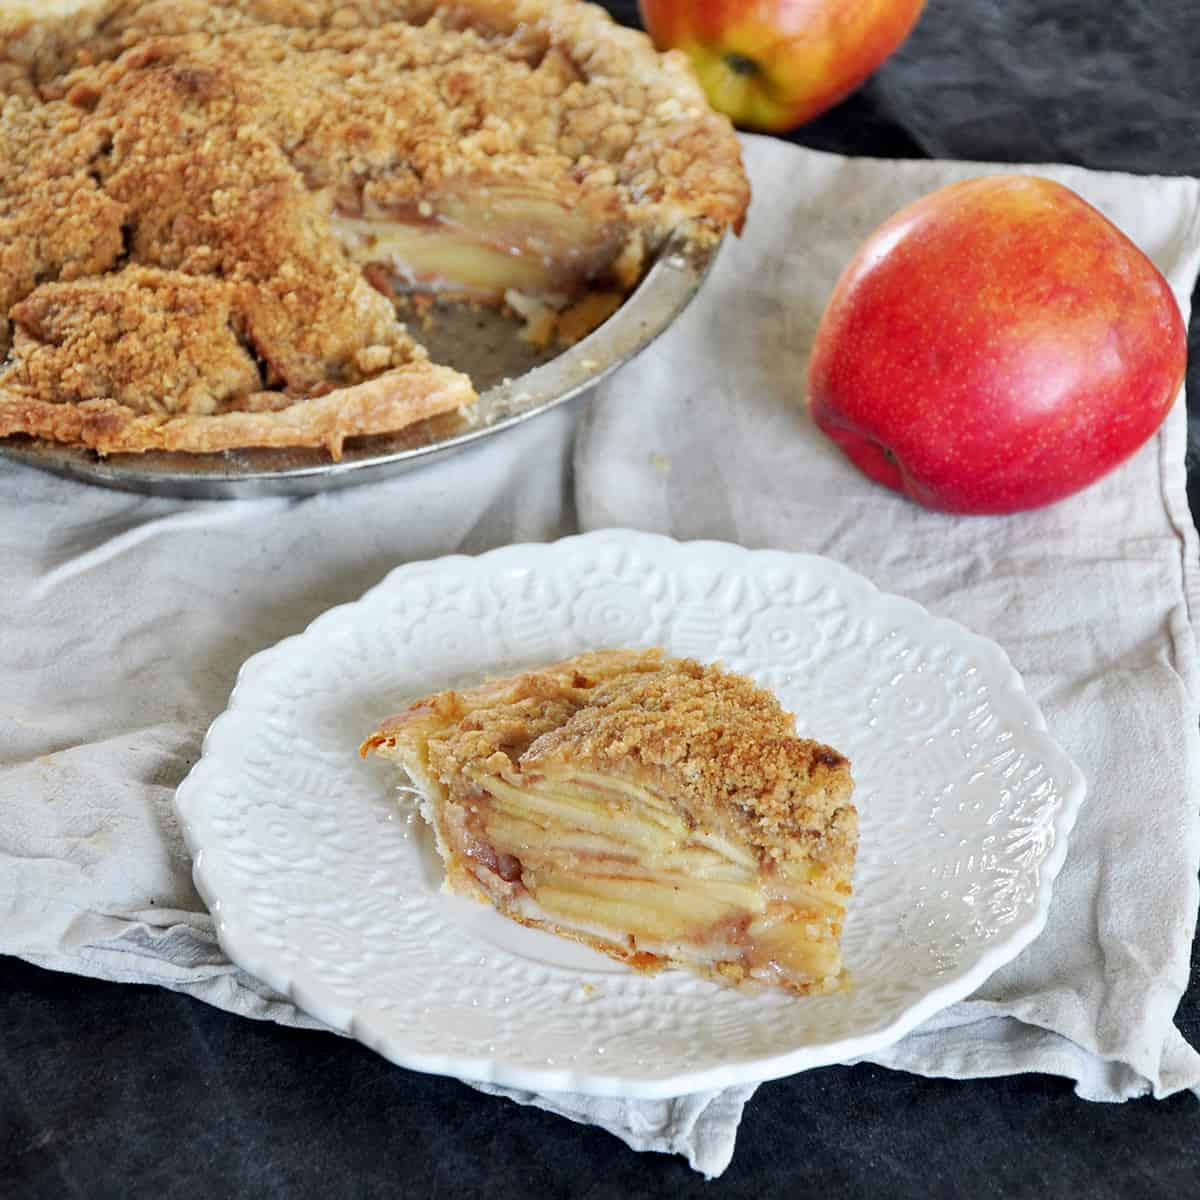 A single slice of a dutch apple pie with the rest showing in the background. There is a single Braeburn apple in the back and it is all on a white cloth.